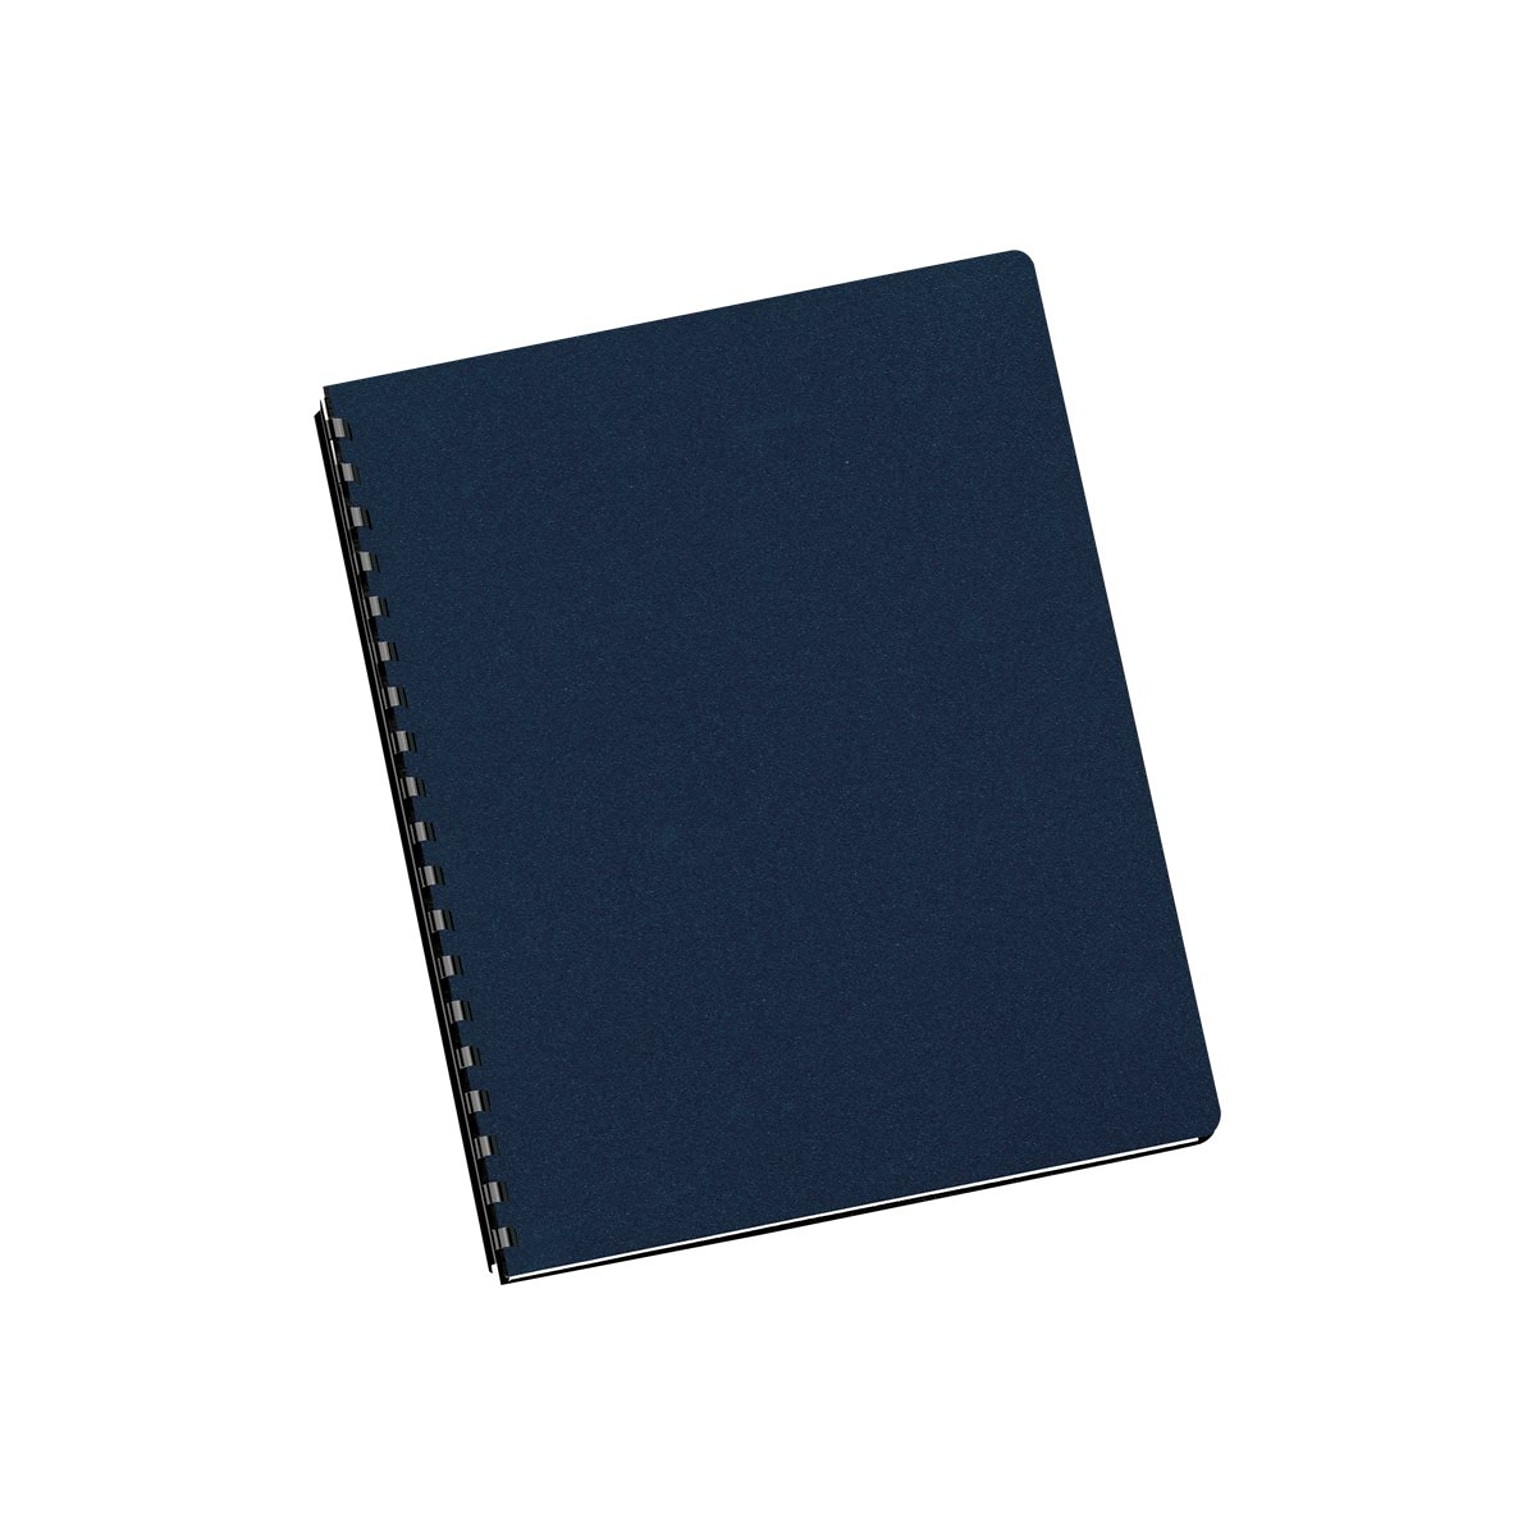 Fellowes Futura Presentation Covers Oversize Presentation Covers, 8.75W x 11.25H, Navy, 25 Pack (5224801)